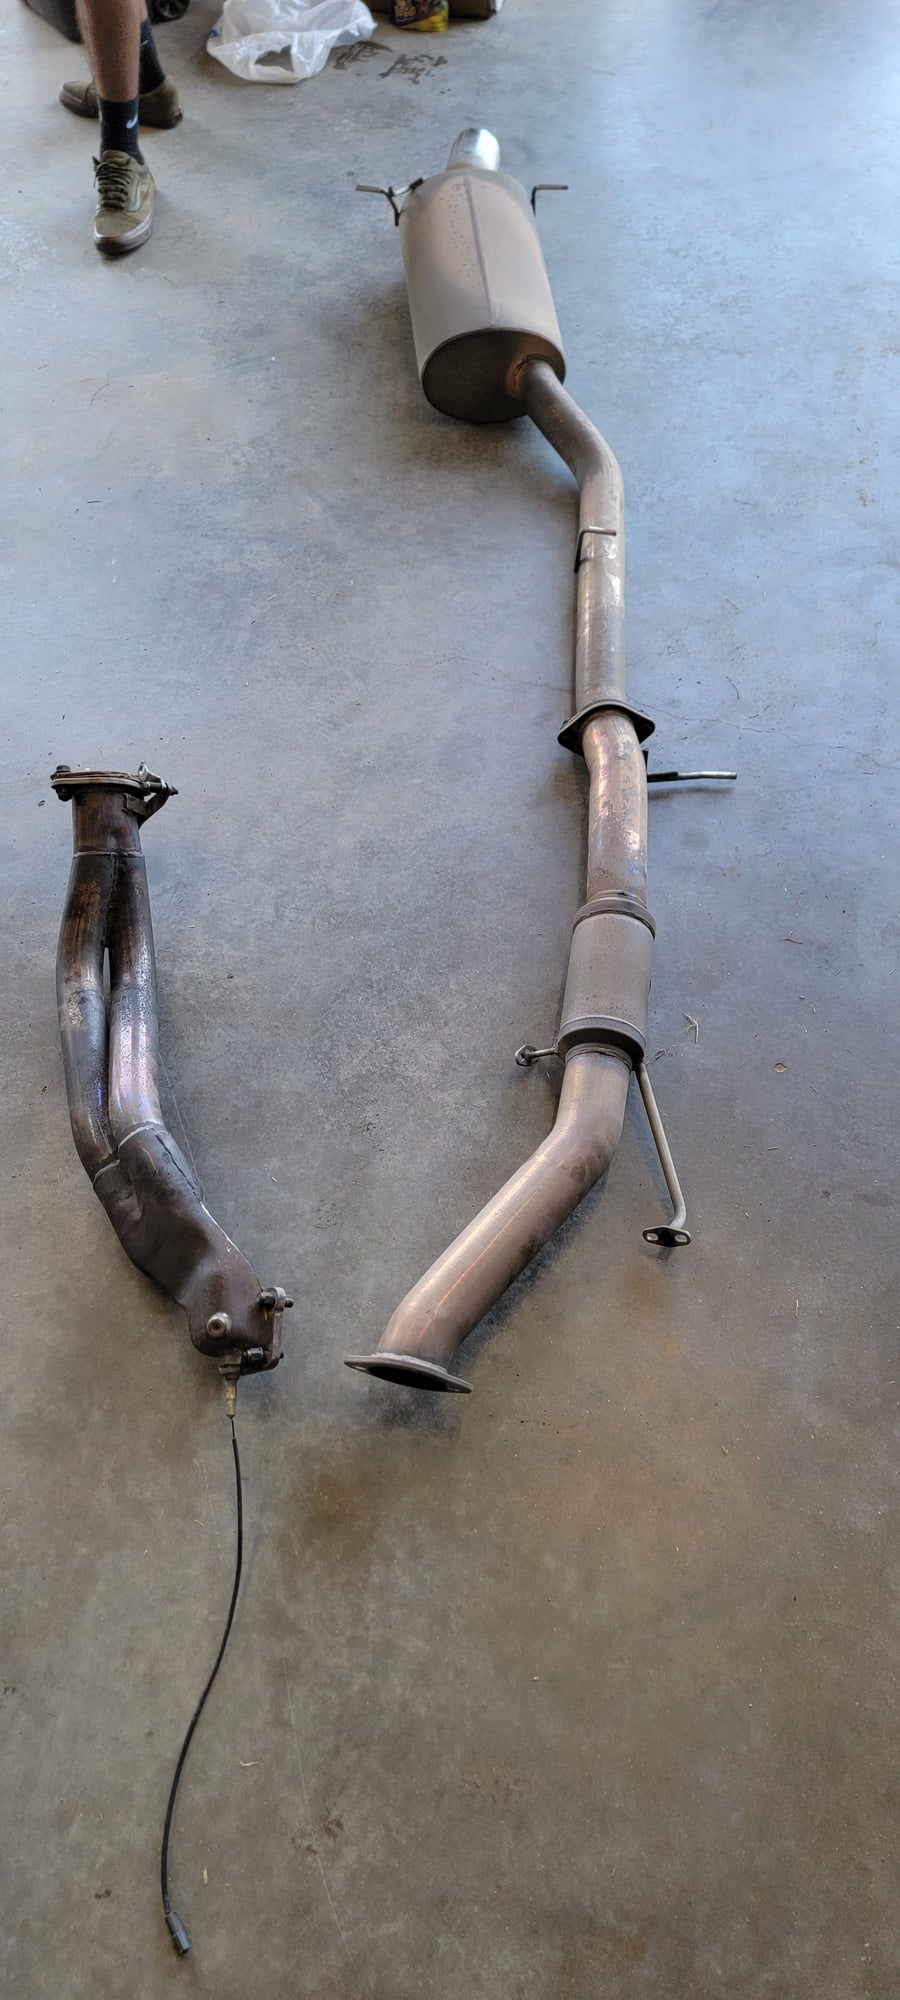 Engine - Exhaust - Knight Sports Exhaust (Downpipe included) - Used - 1992 to 2002 Mazda RX-7 - Burleson, TX 76028, United States